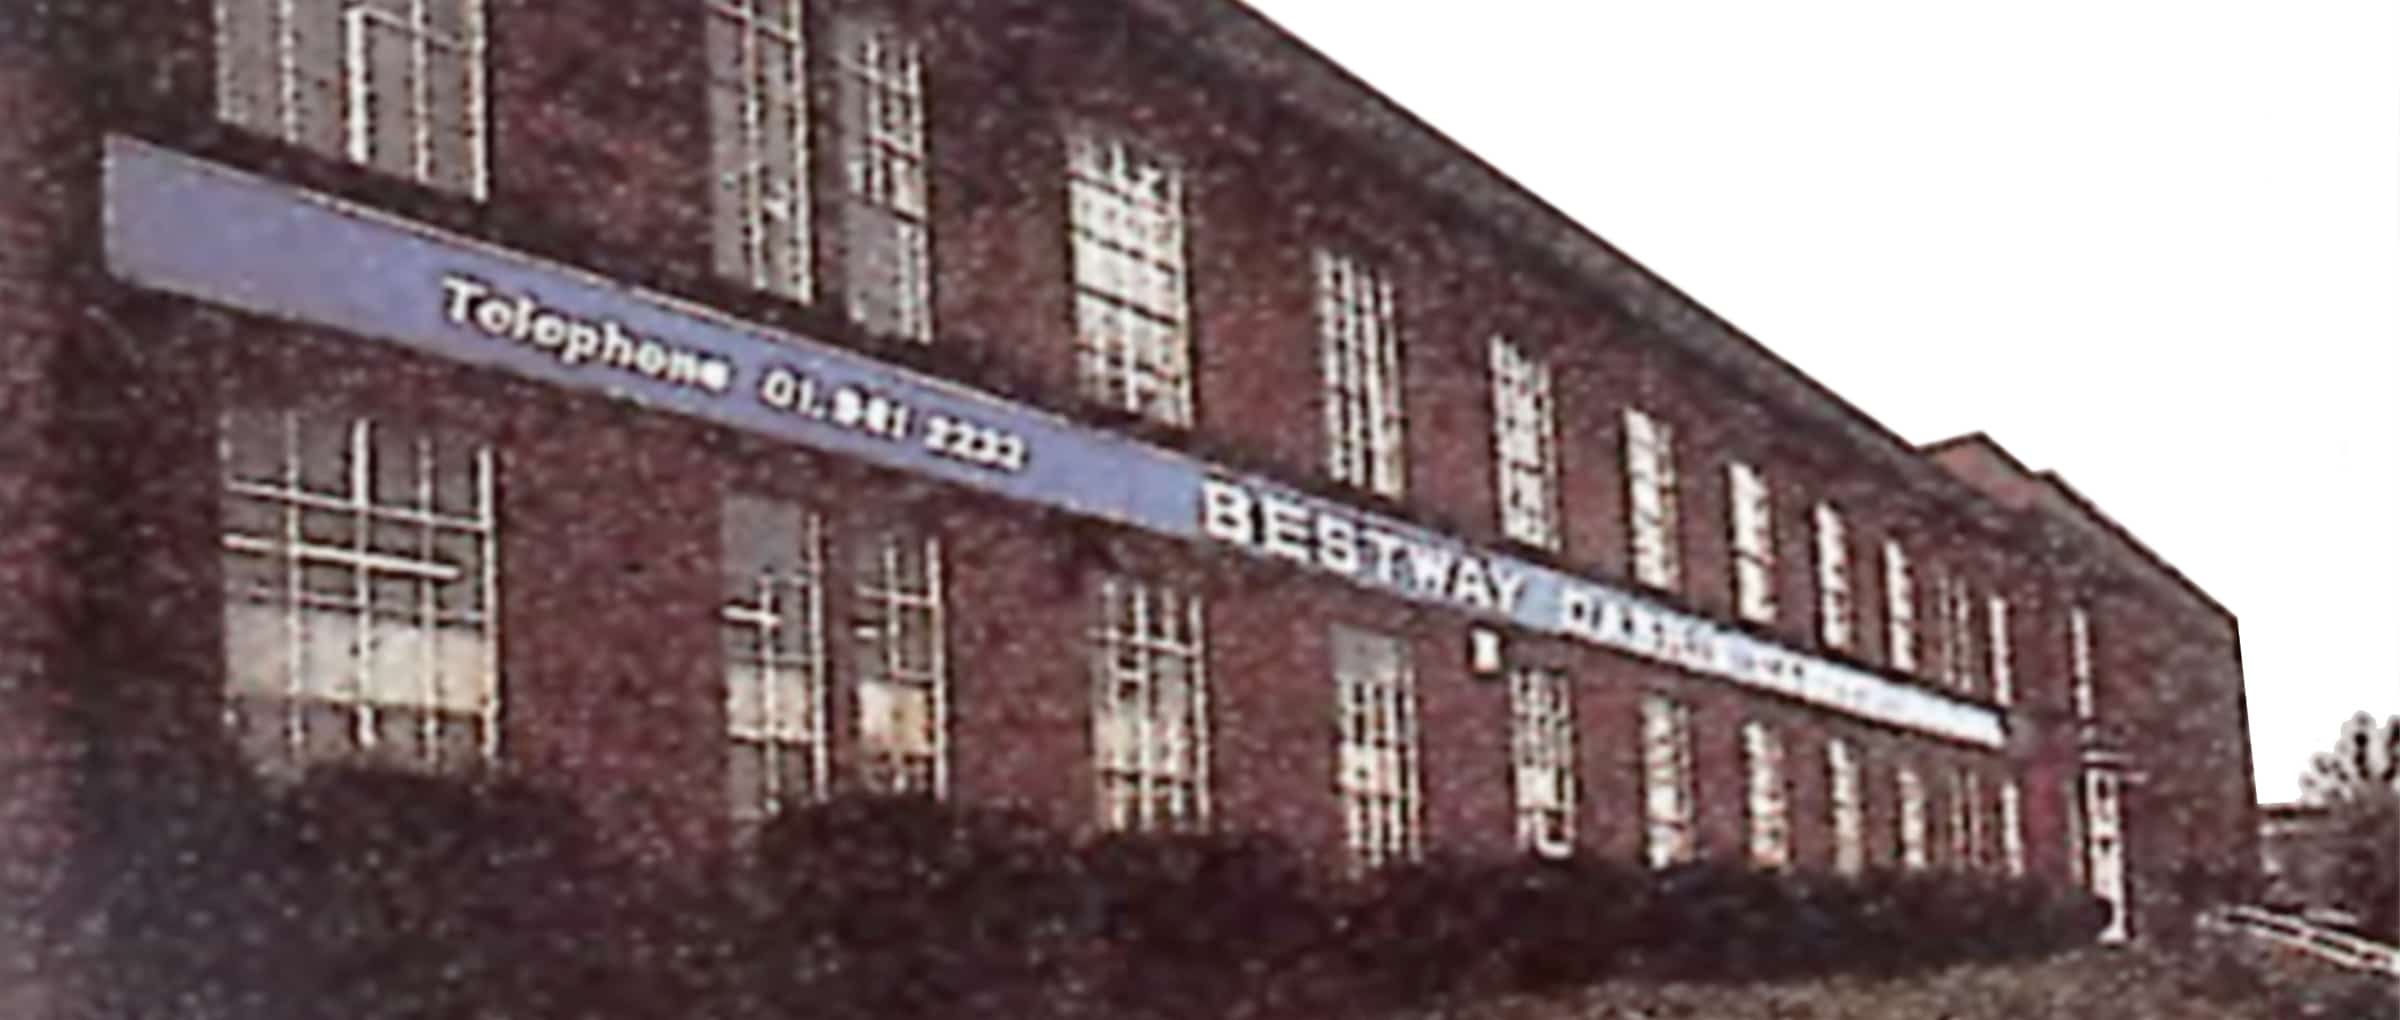 First Bestway Wholesale depot in Acton, London, 1976